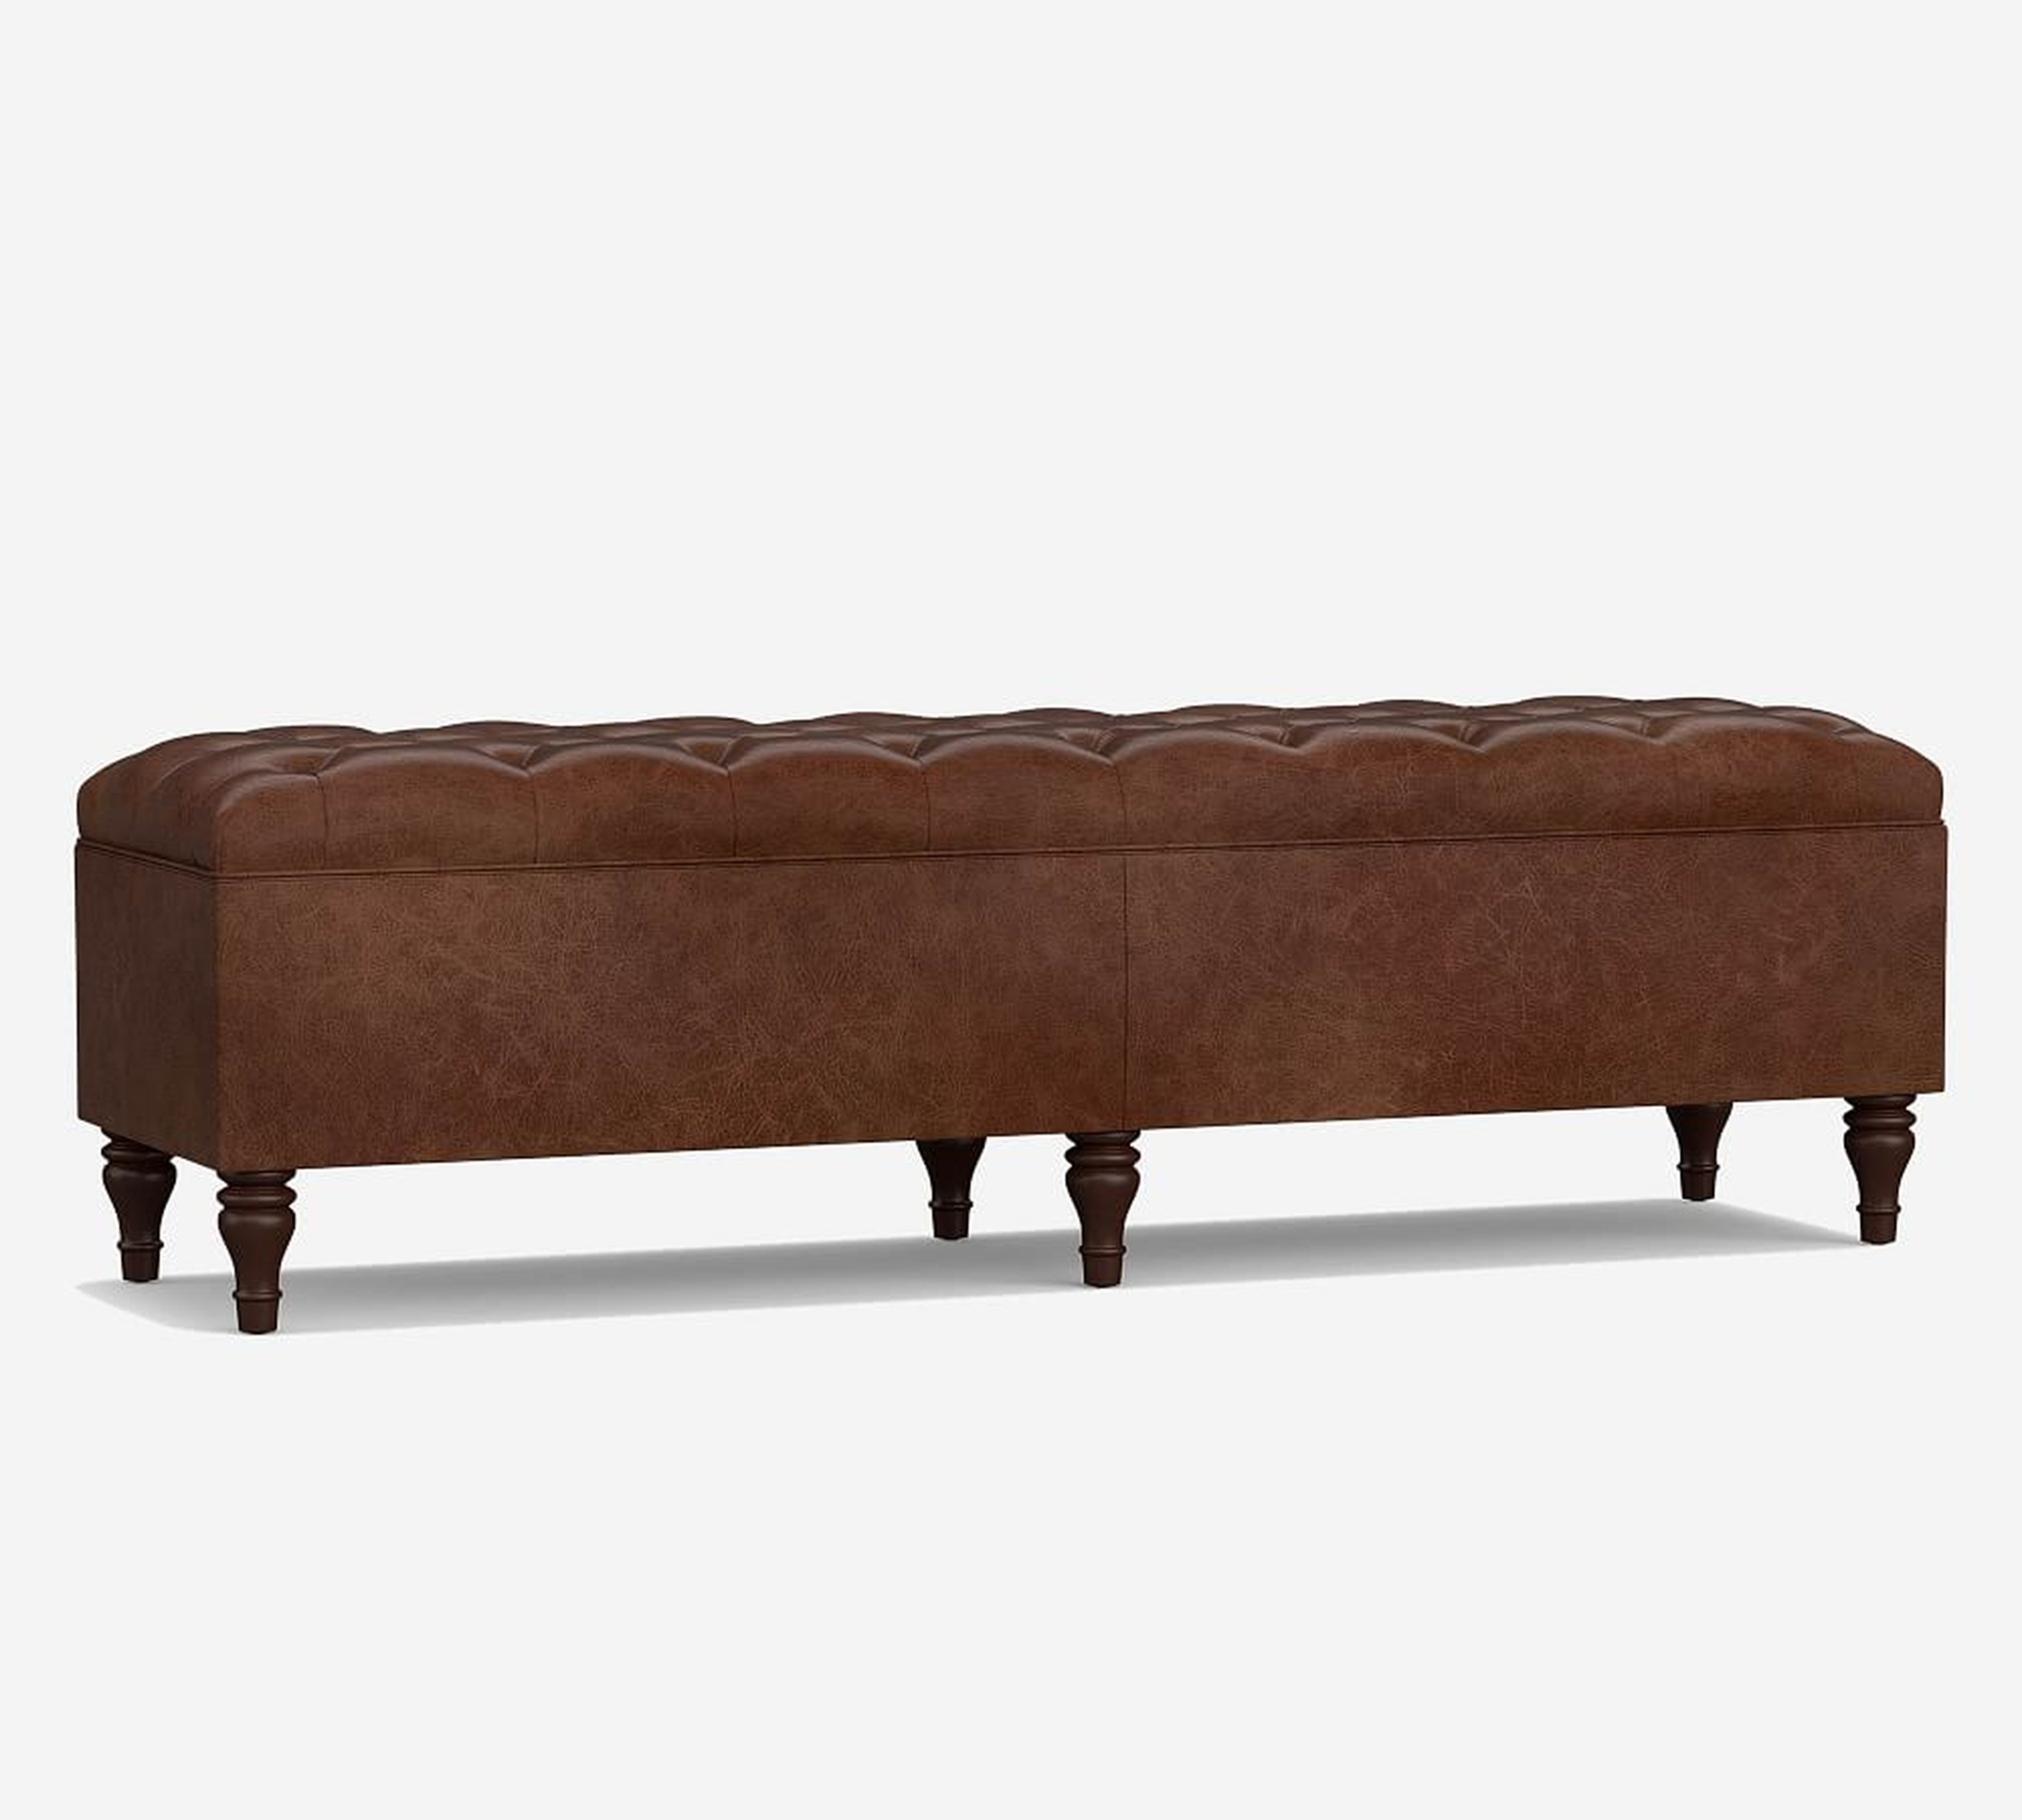 Lorraine Tufted Leather King Storage Bench, Vintage Cocoa - Pottery Barn